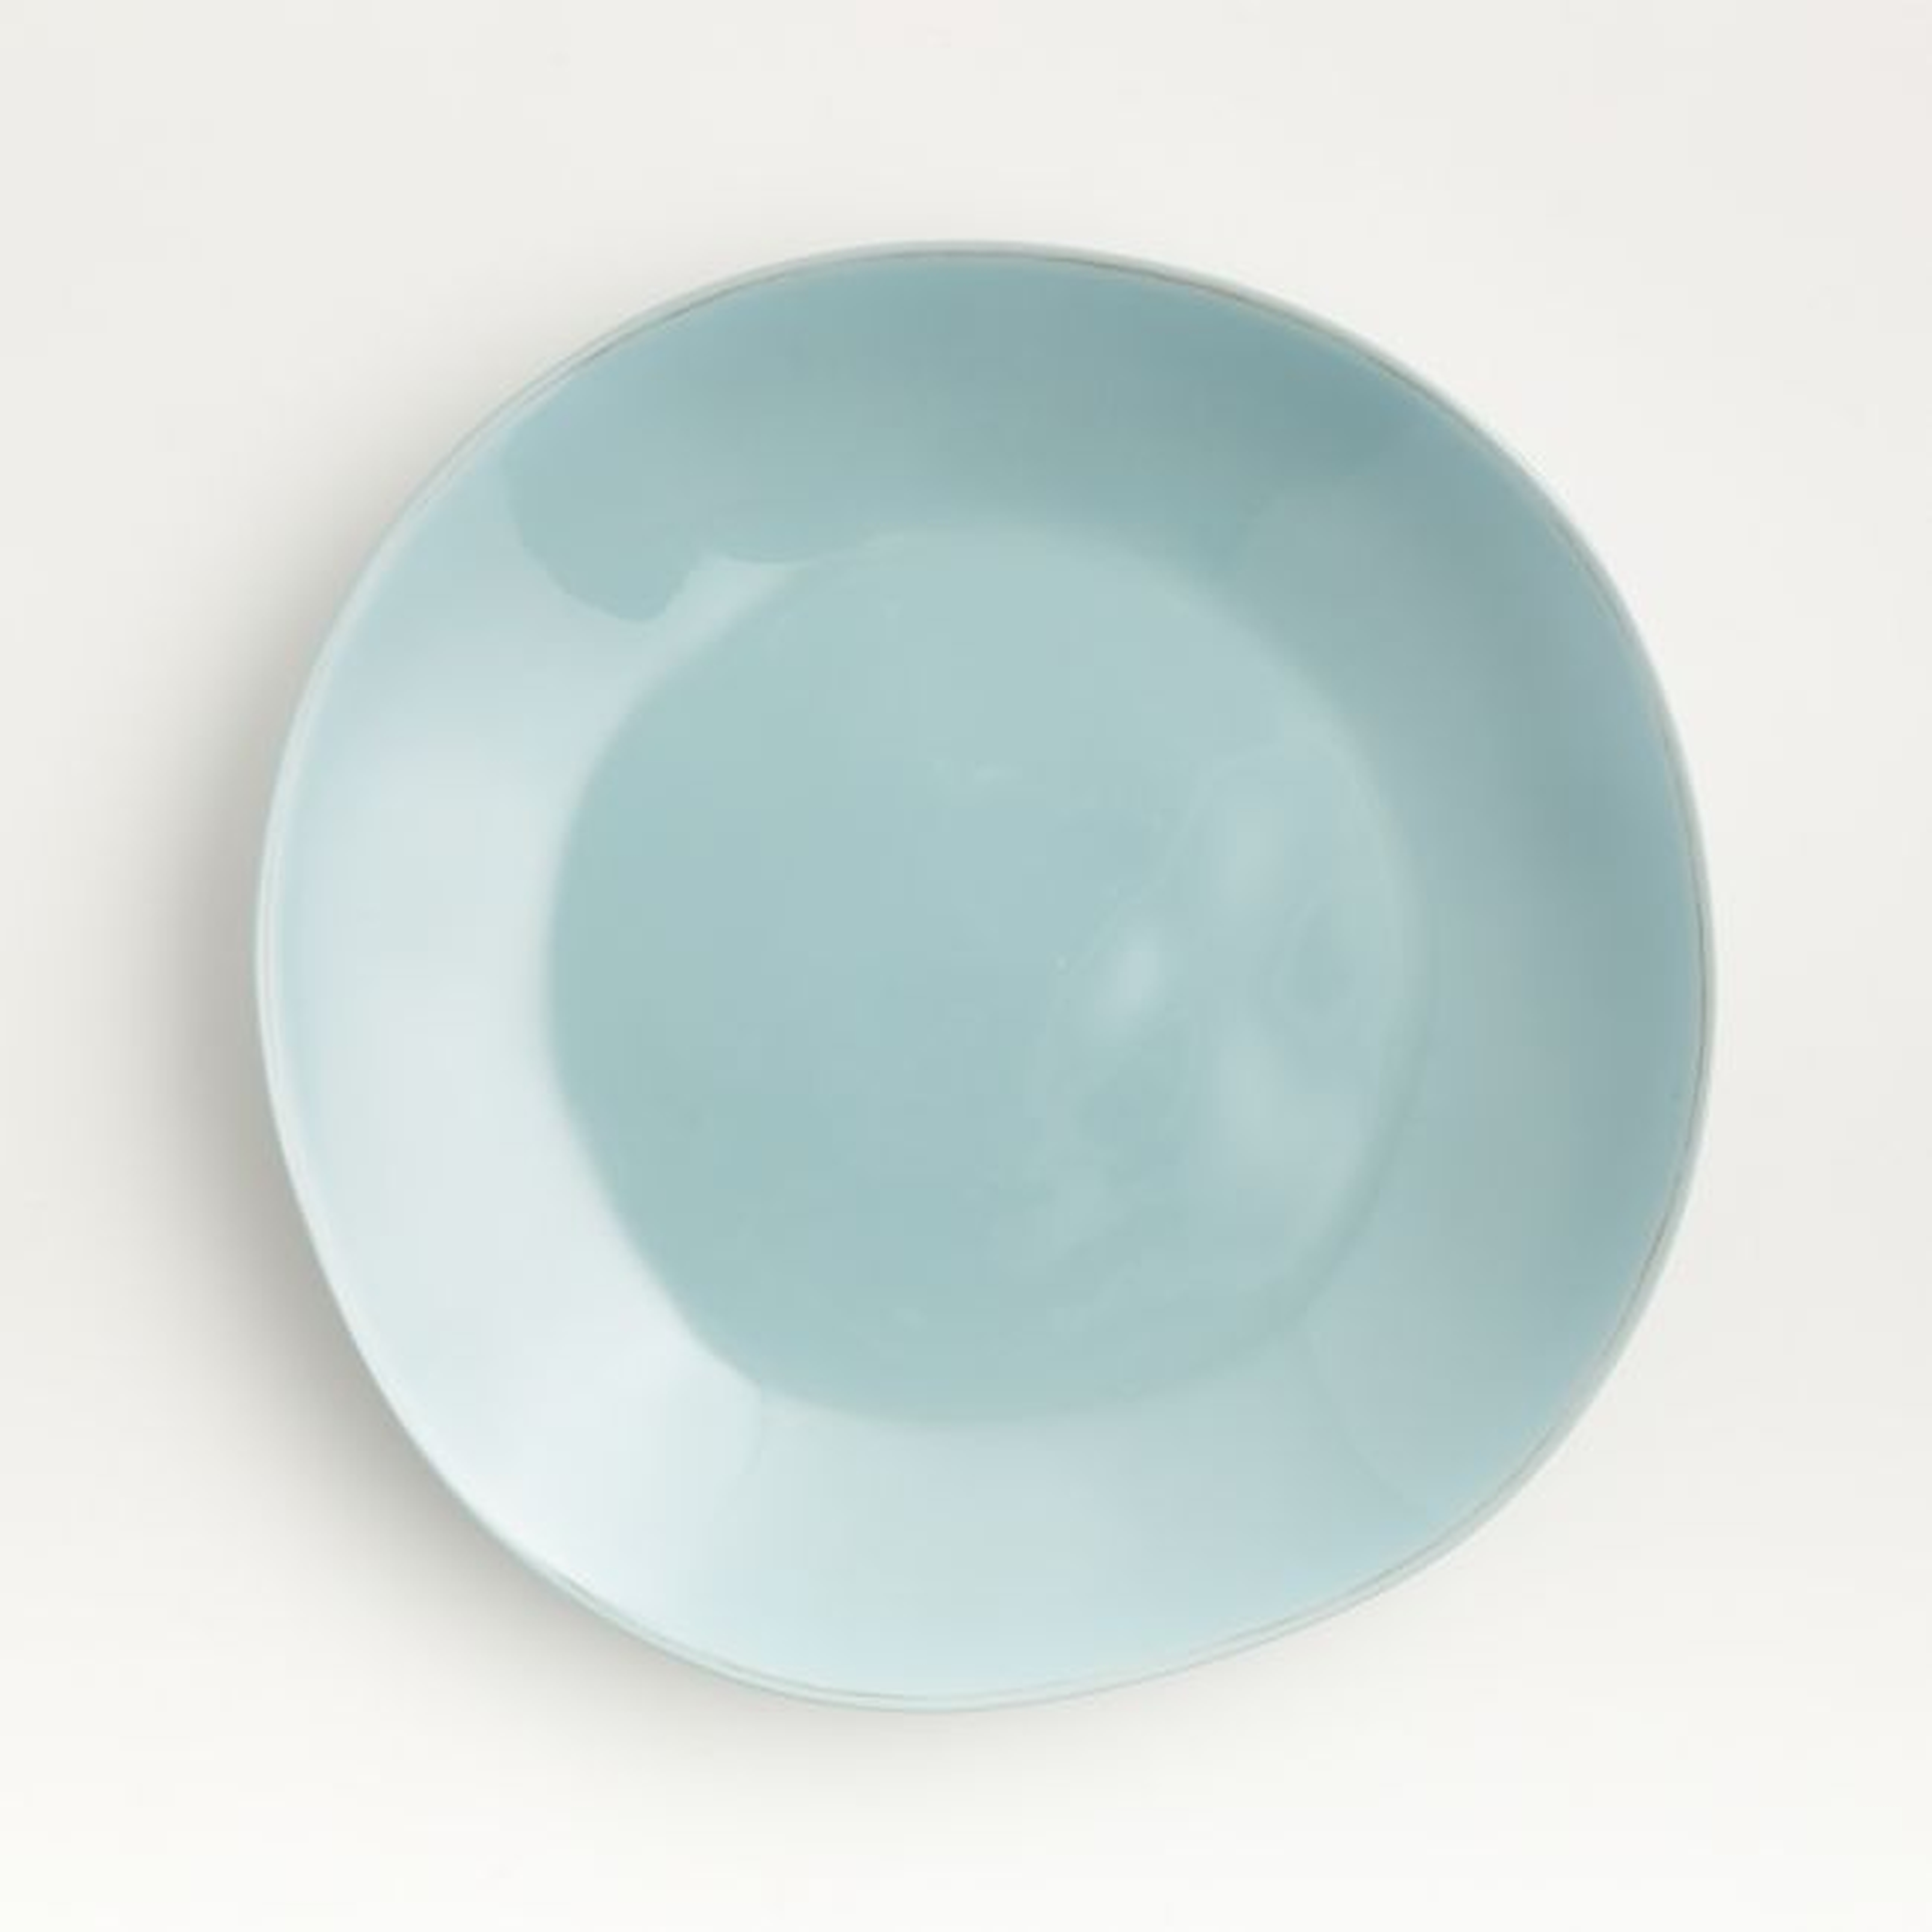 Marin Blue Outdoor Melamine Dinner Plate - Crate and Barrel